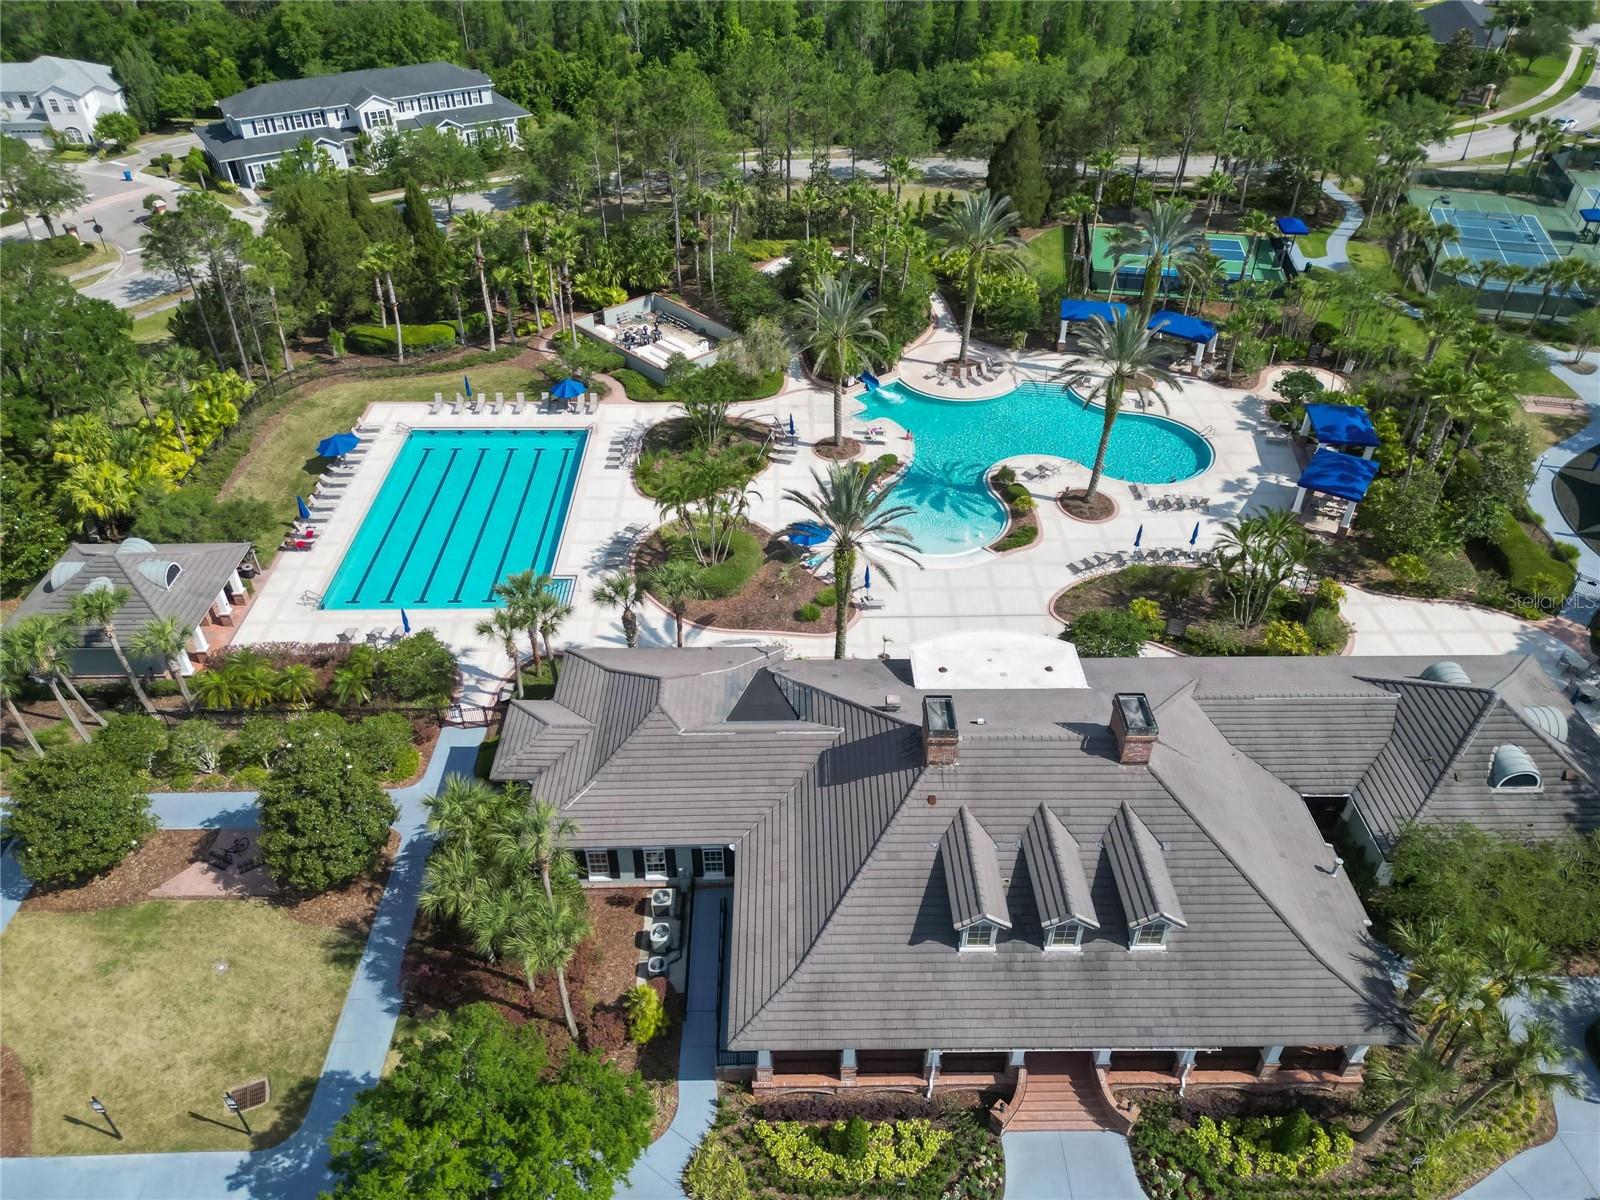 AERIAL VIEWS OF THIS GORGEOUS EXECUTIVE STYLE HOME